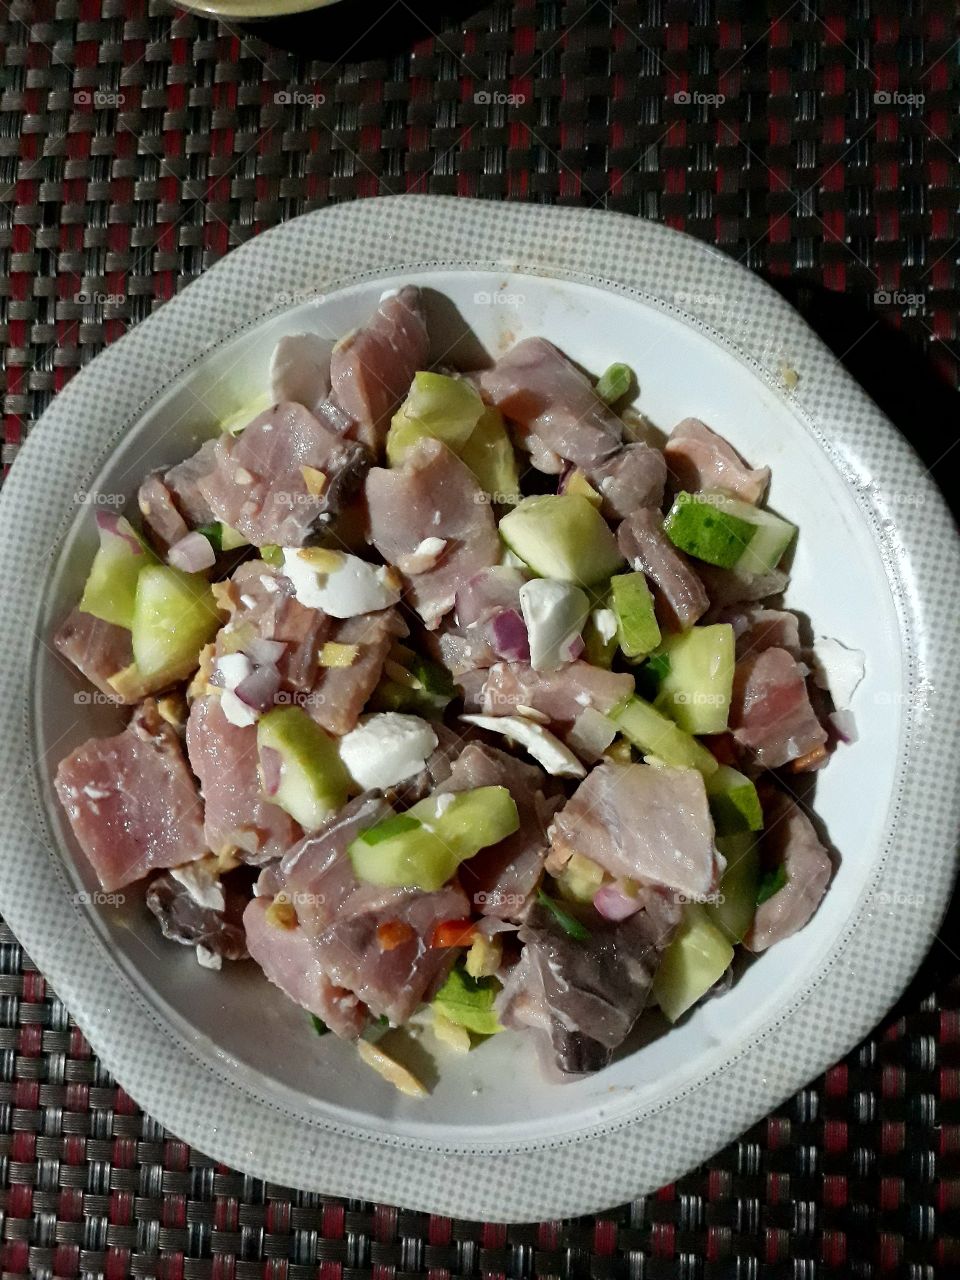 Kinilaw or raw fish salad is a Filipino dish. fresh fish fillet flavored with vinegar, ginger, onions, cucumber.